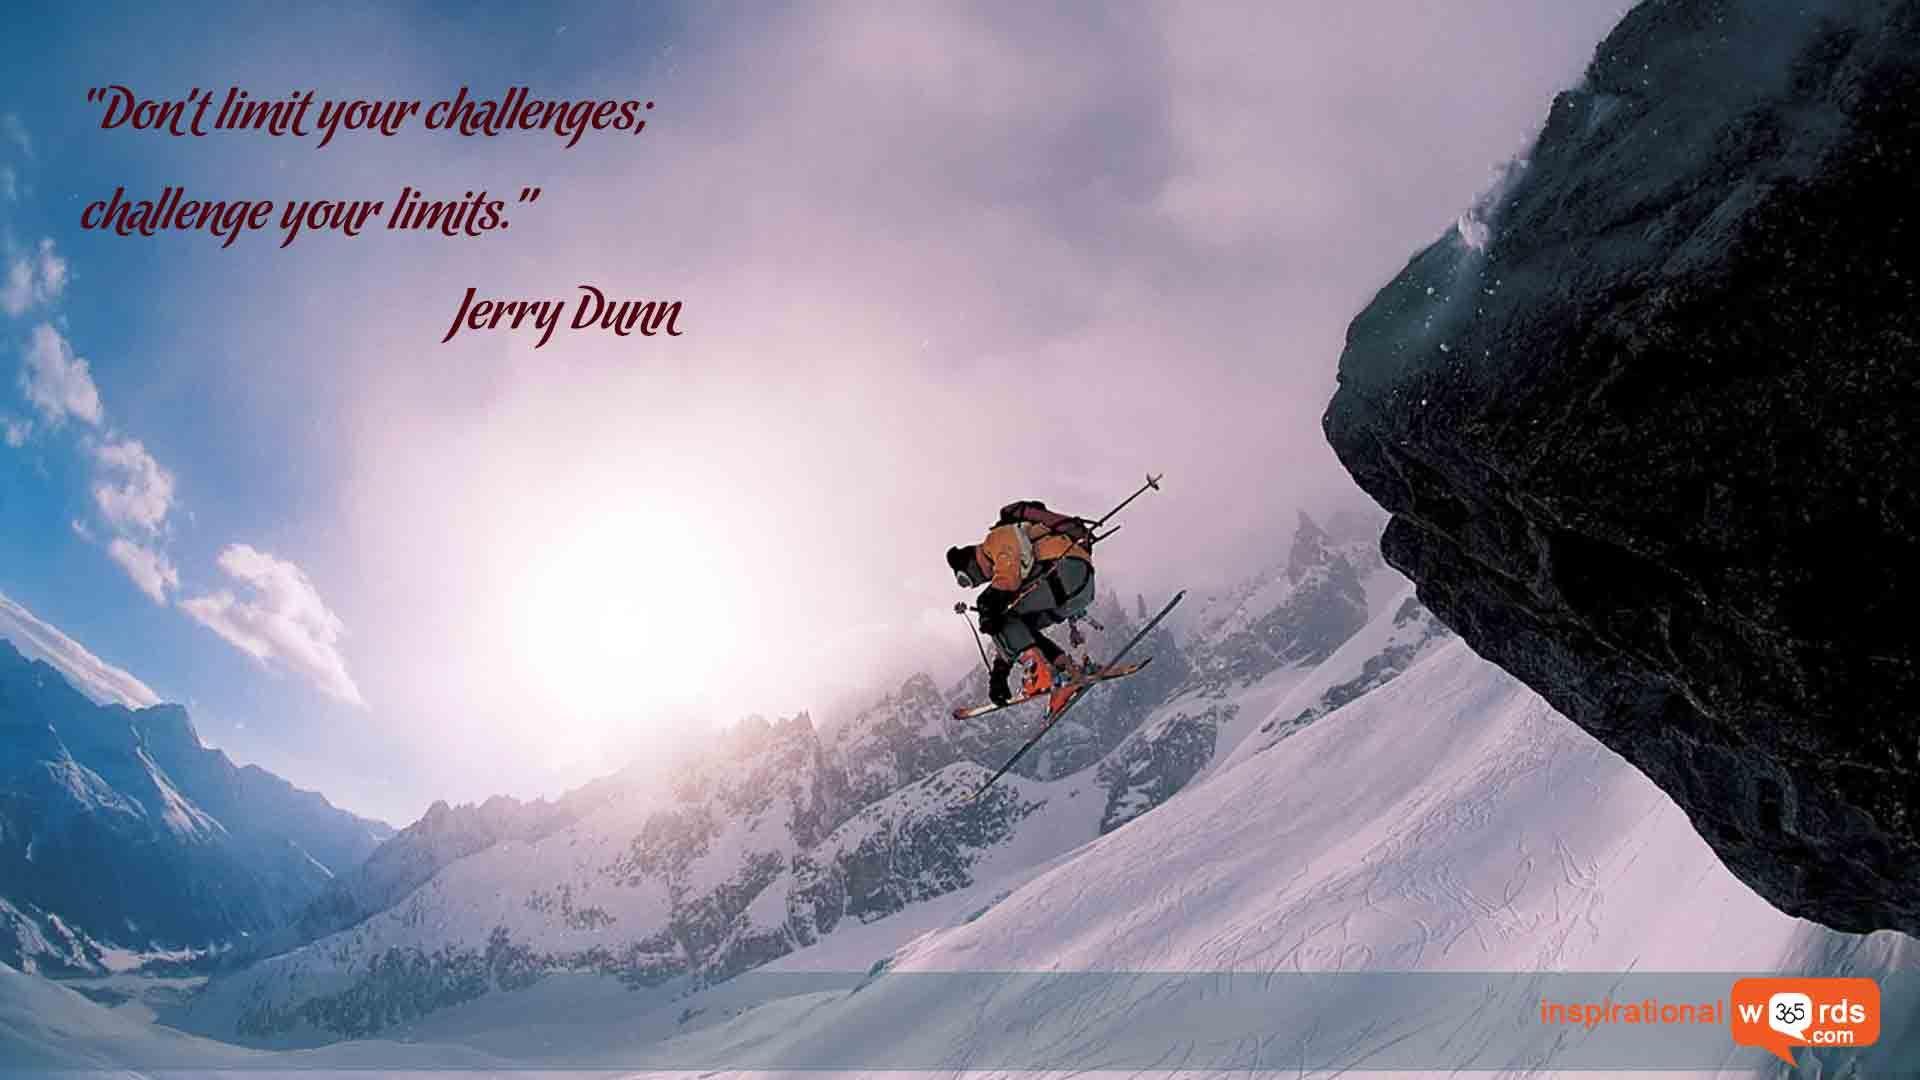 Inspirational Wallpaper Quote by Jerry Dunn “Don't limit